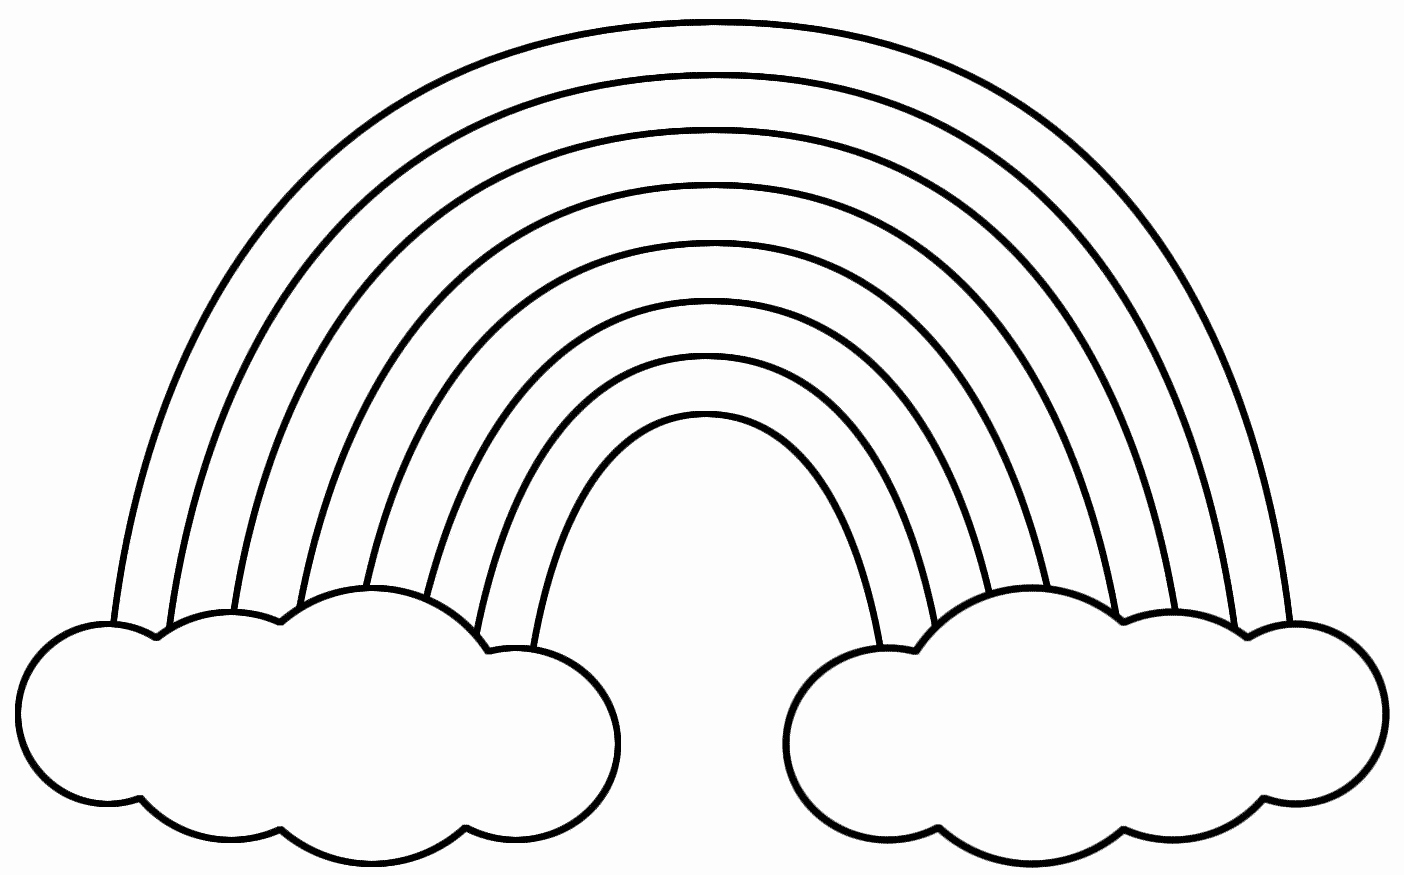 Cloud Template Printable New Free Printable Cloud Template Download Free Clip Art